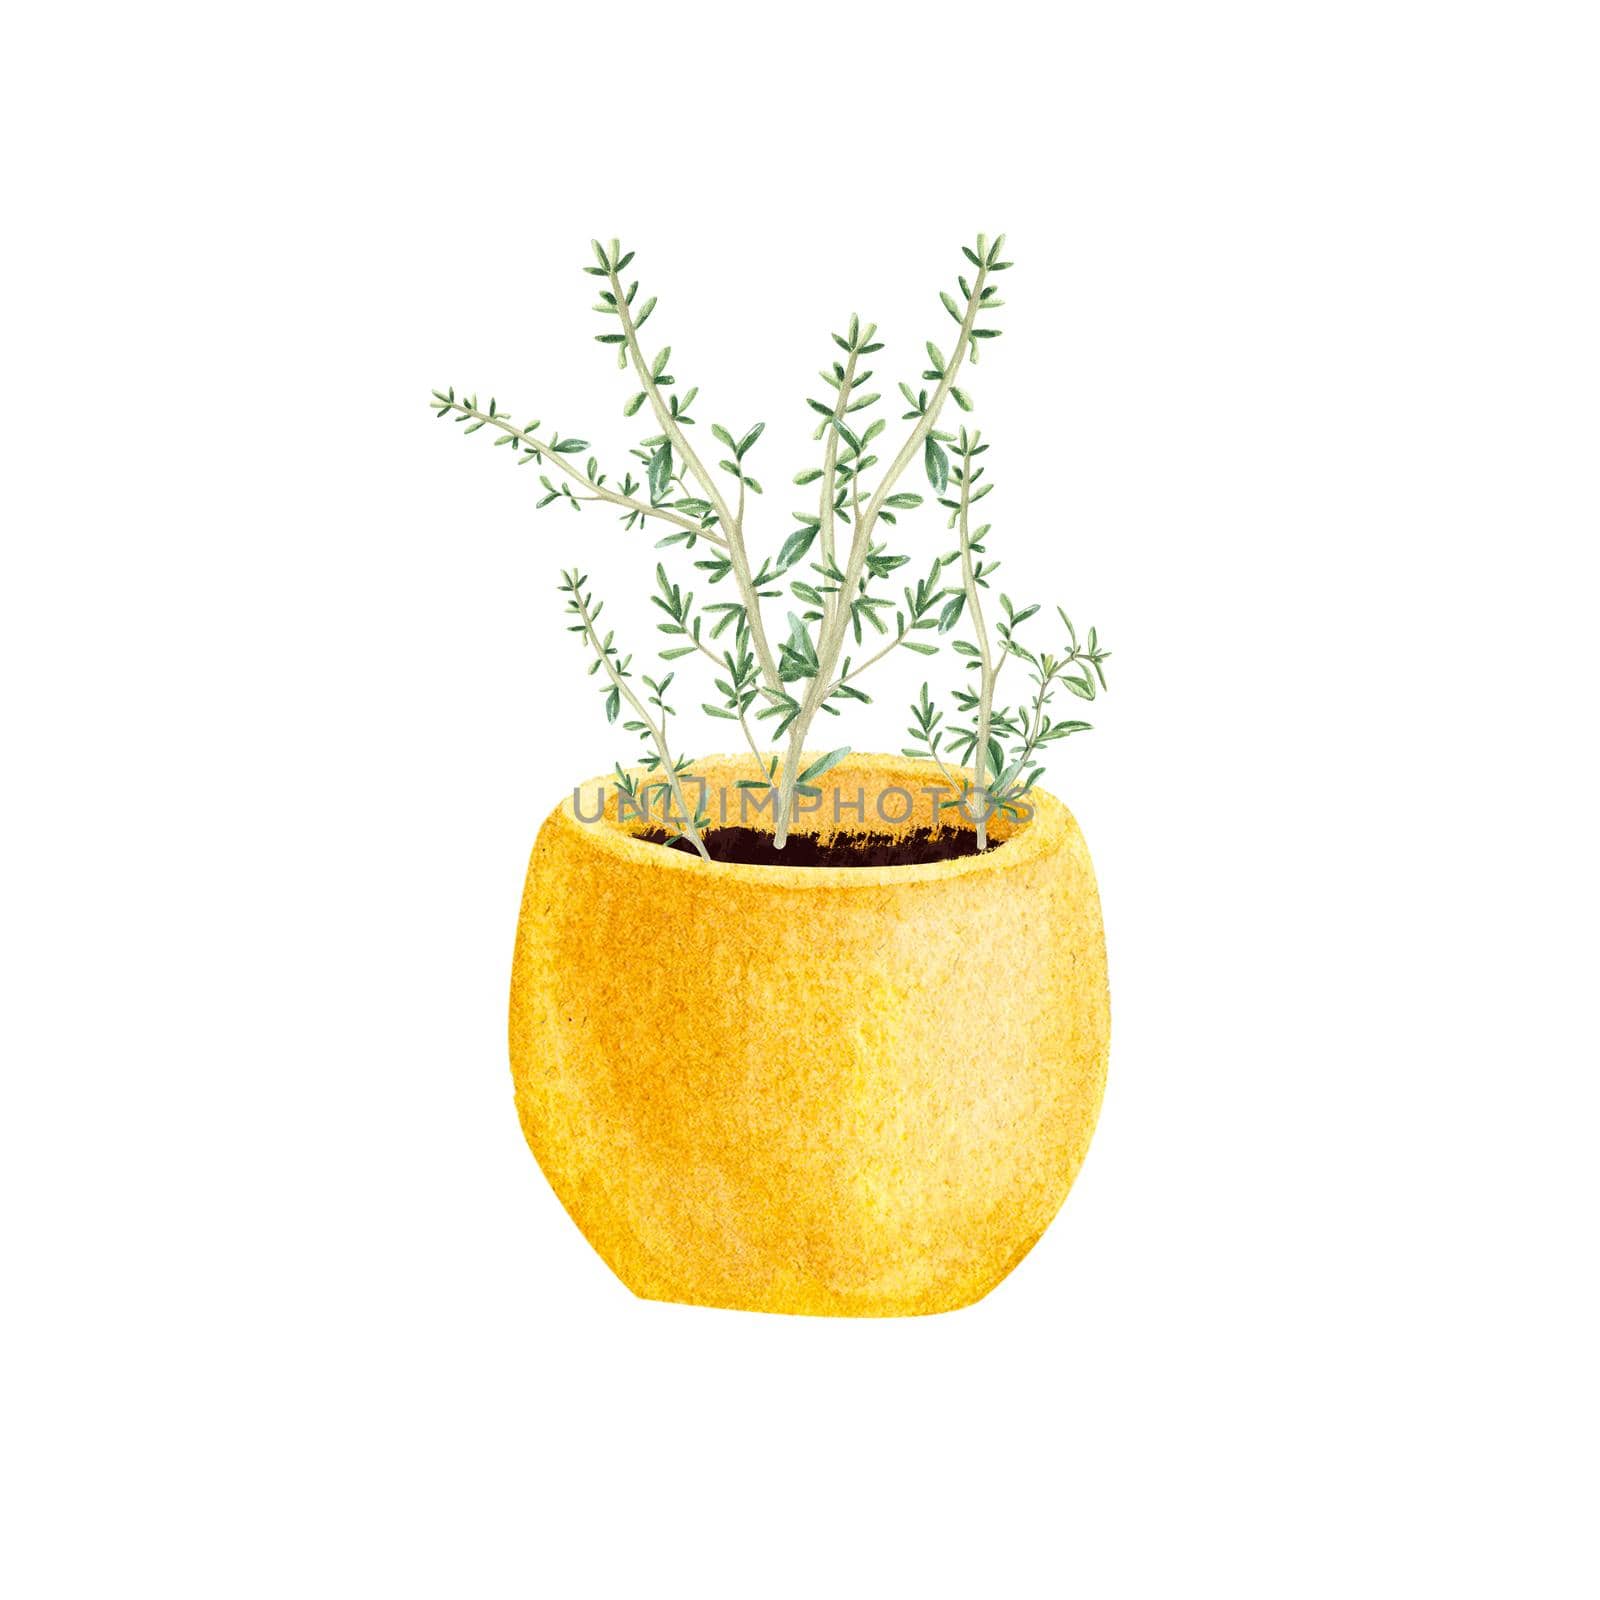 Thyme in a pot isolated on a white background. Provencal herbs in watercolor. Illustration of kitchen herbs and spices. Suitable for postcards, business cards, banners, booklets, design, textiles by NastyaChe